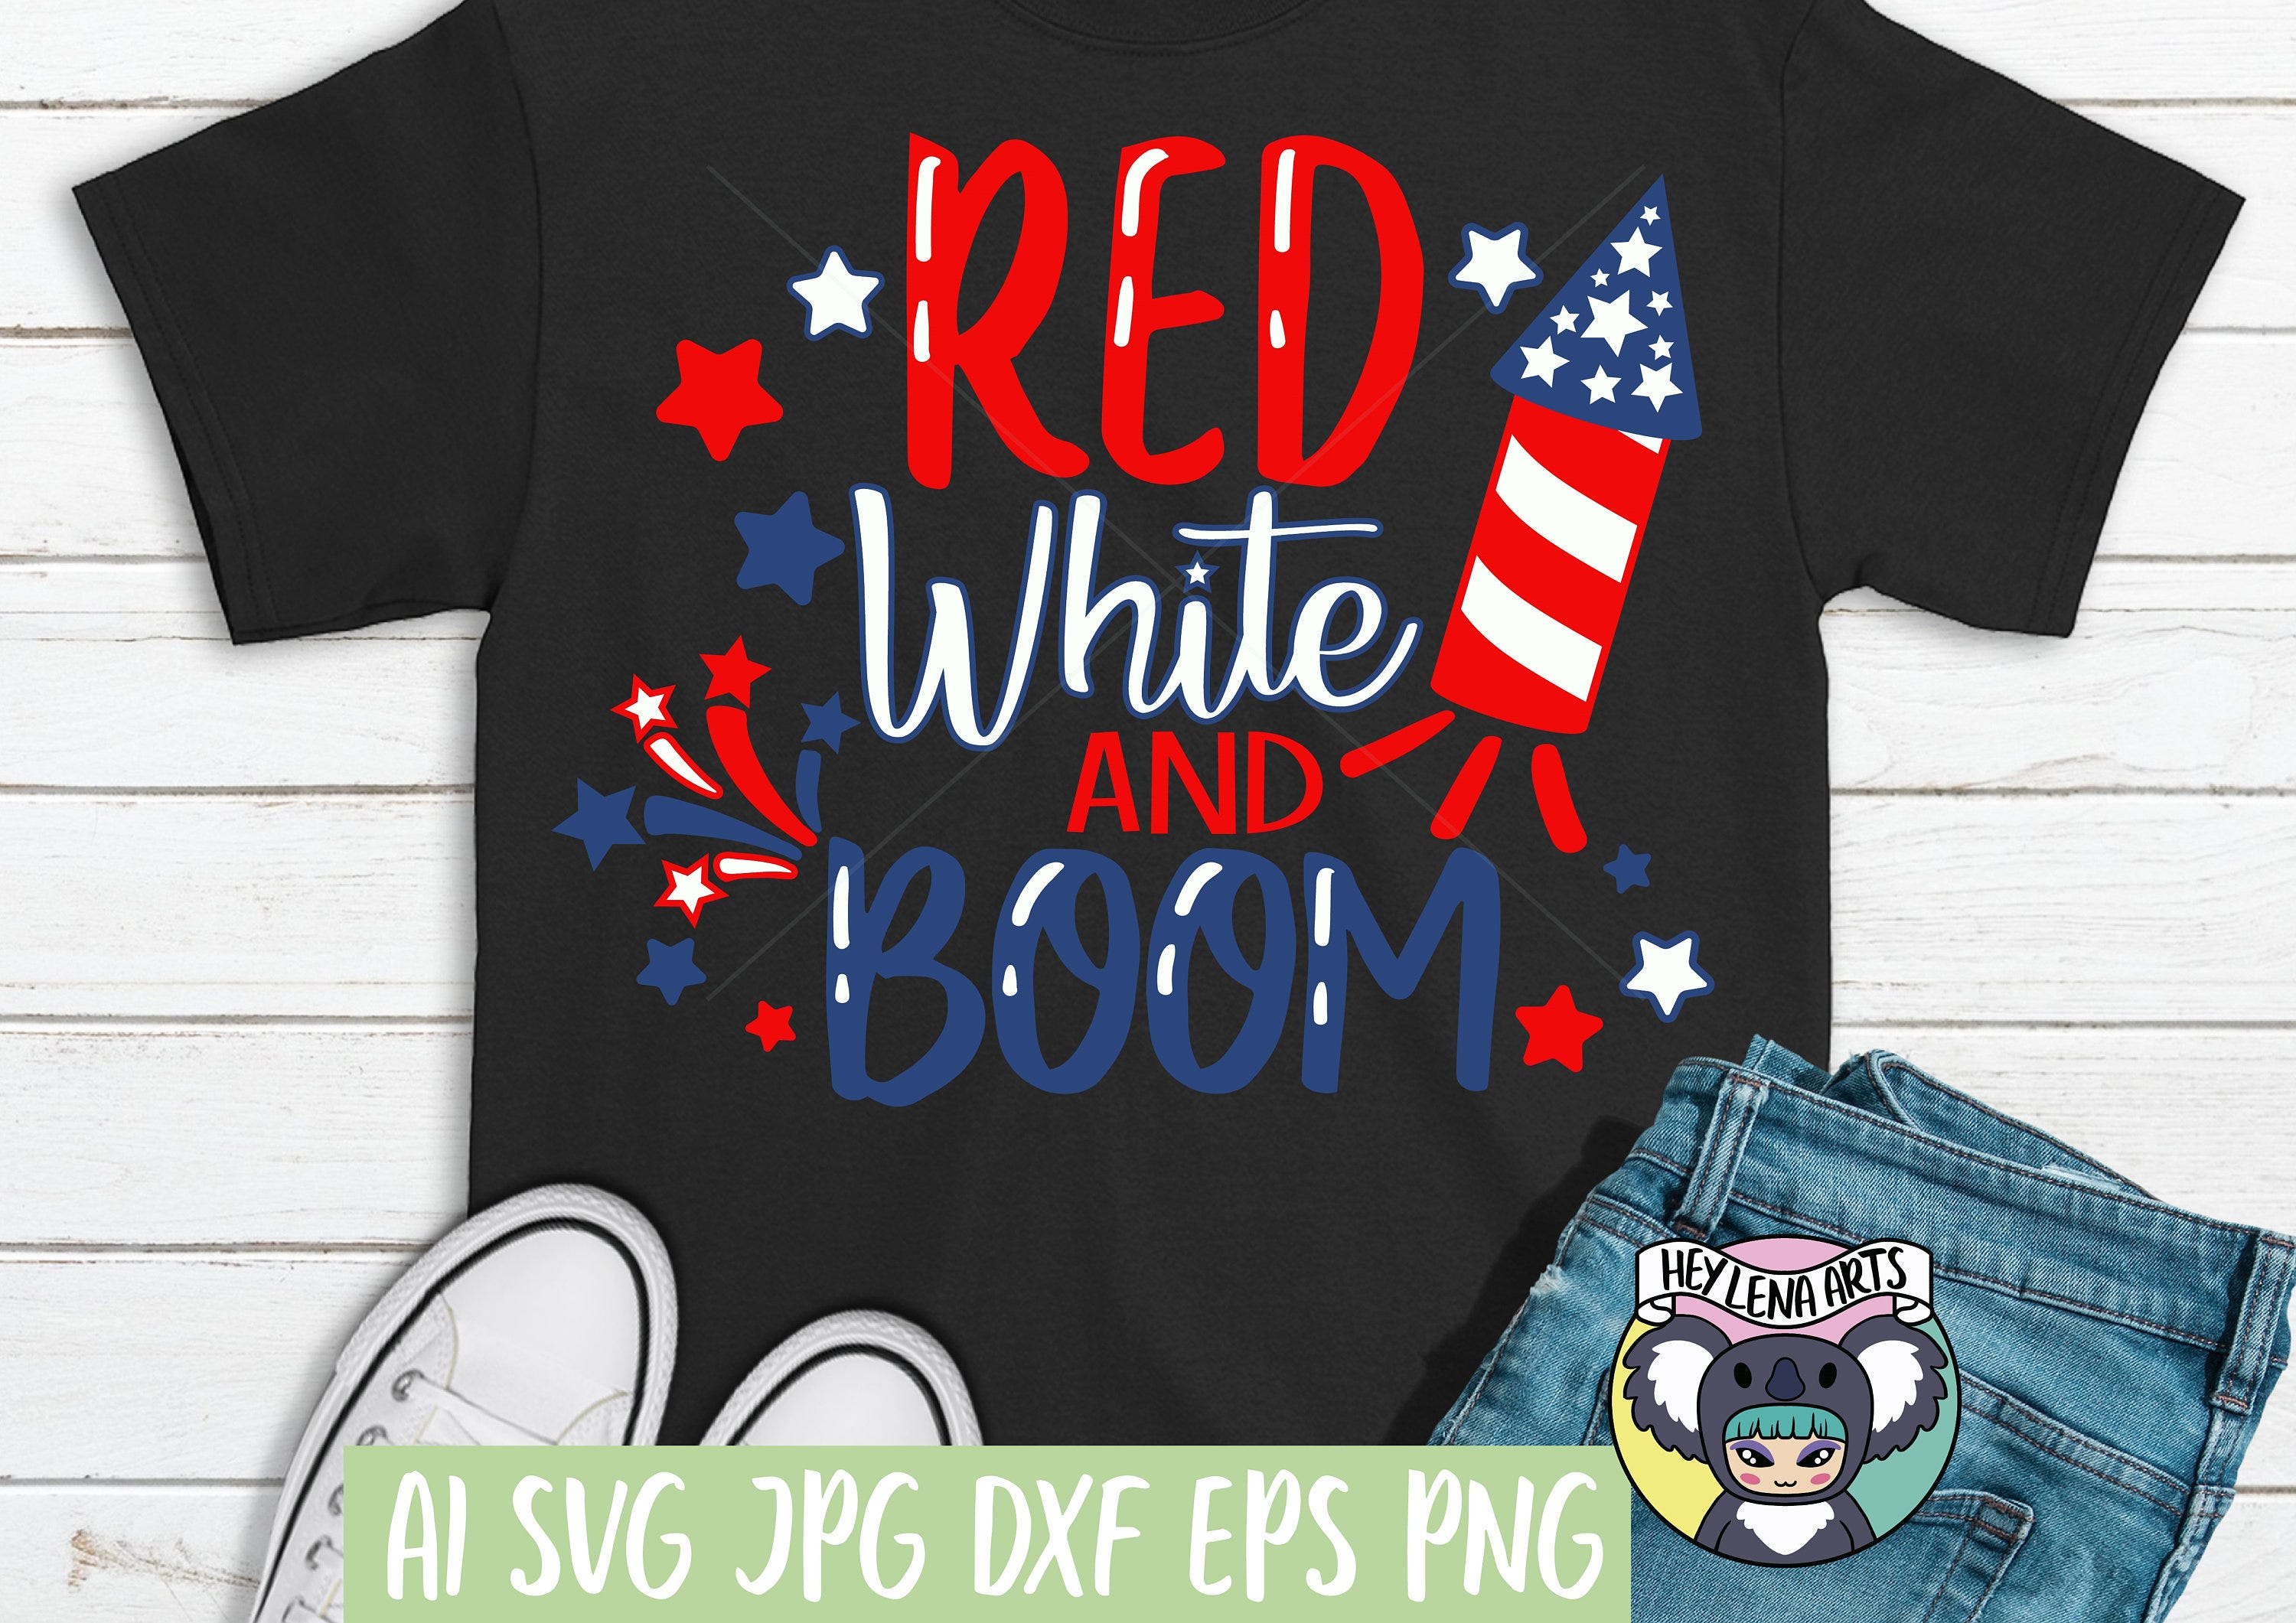 4th of July svg, Red White and Boom, Independence Day svg, American flag svg, patriotic, Svg Files for Cricut, cut file, dxf files for laser